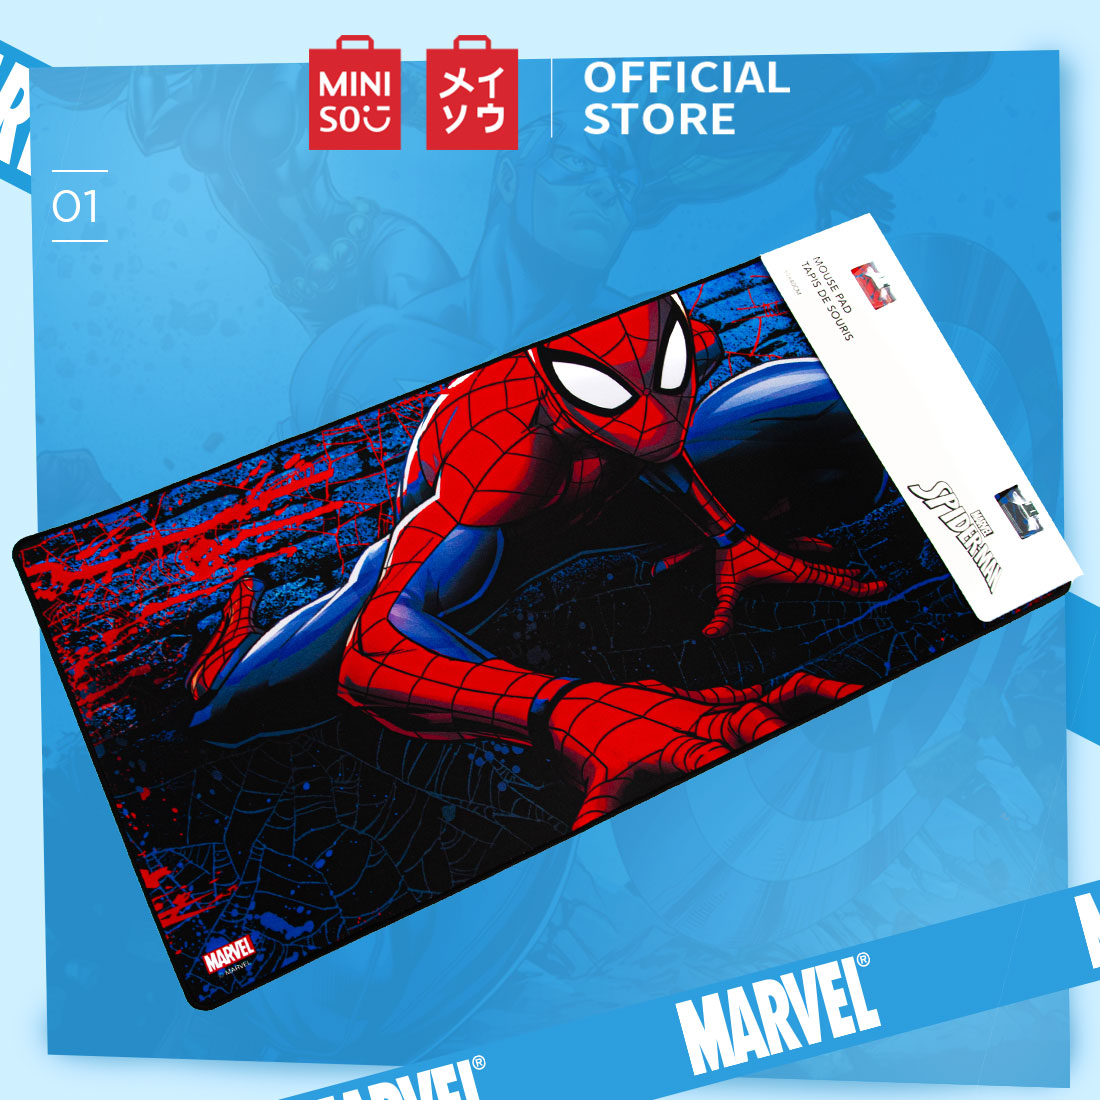 MINISO Marvel Desk Pad Office Non-Slip Desk Cover Protector Desk Mat Mouse Pads Desk Writing Mat for Office and Home Work Spiderman - image 3 of 7